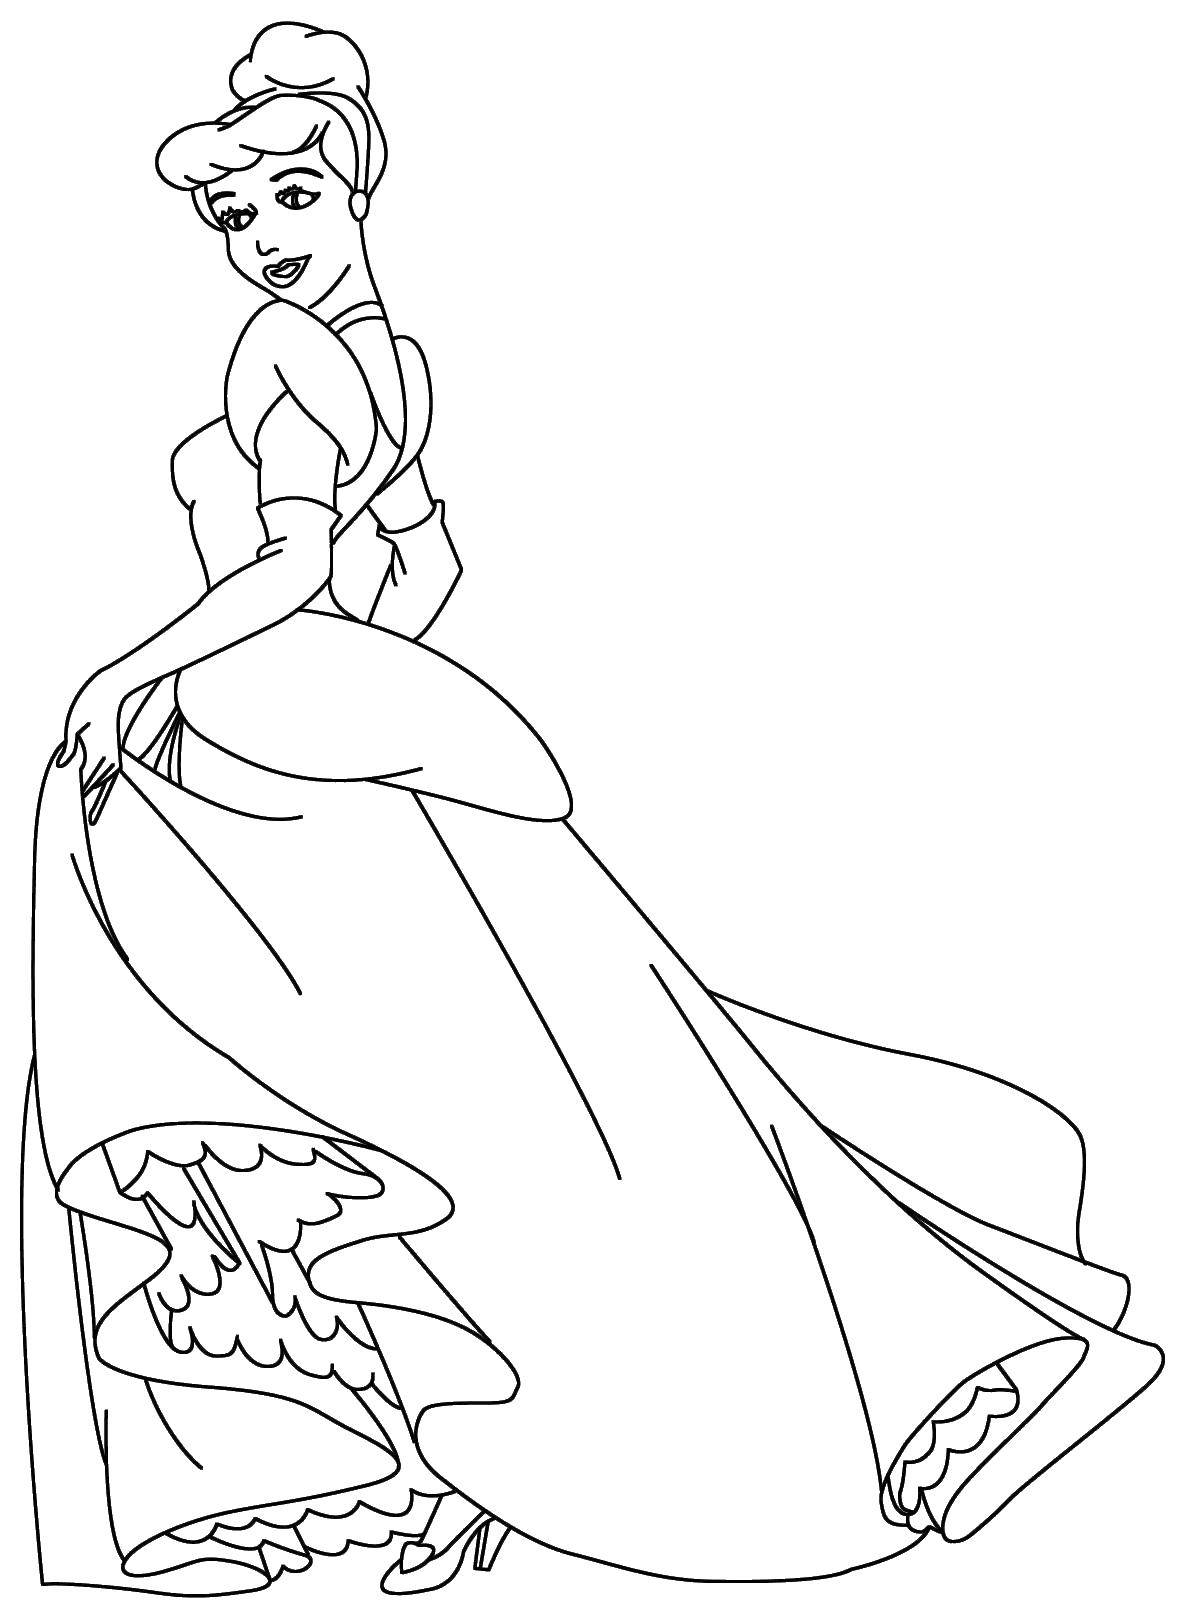 Coloring Cinderella lost a slipper. Category coloring pages for girls. Tags:  Cinderella.